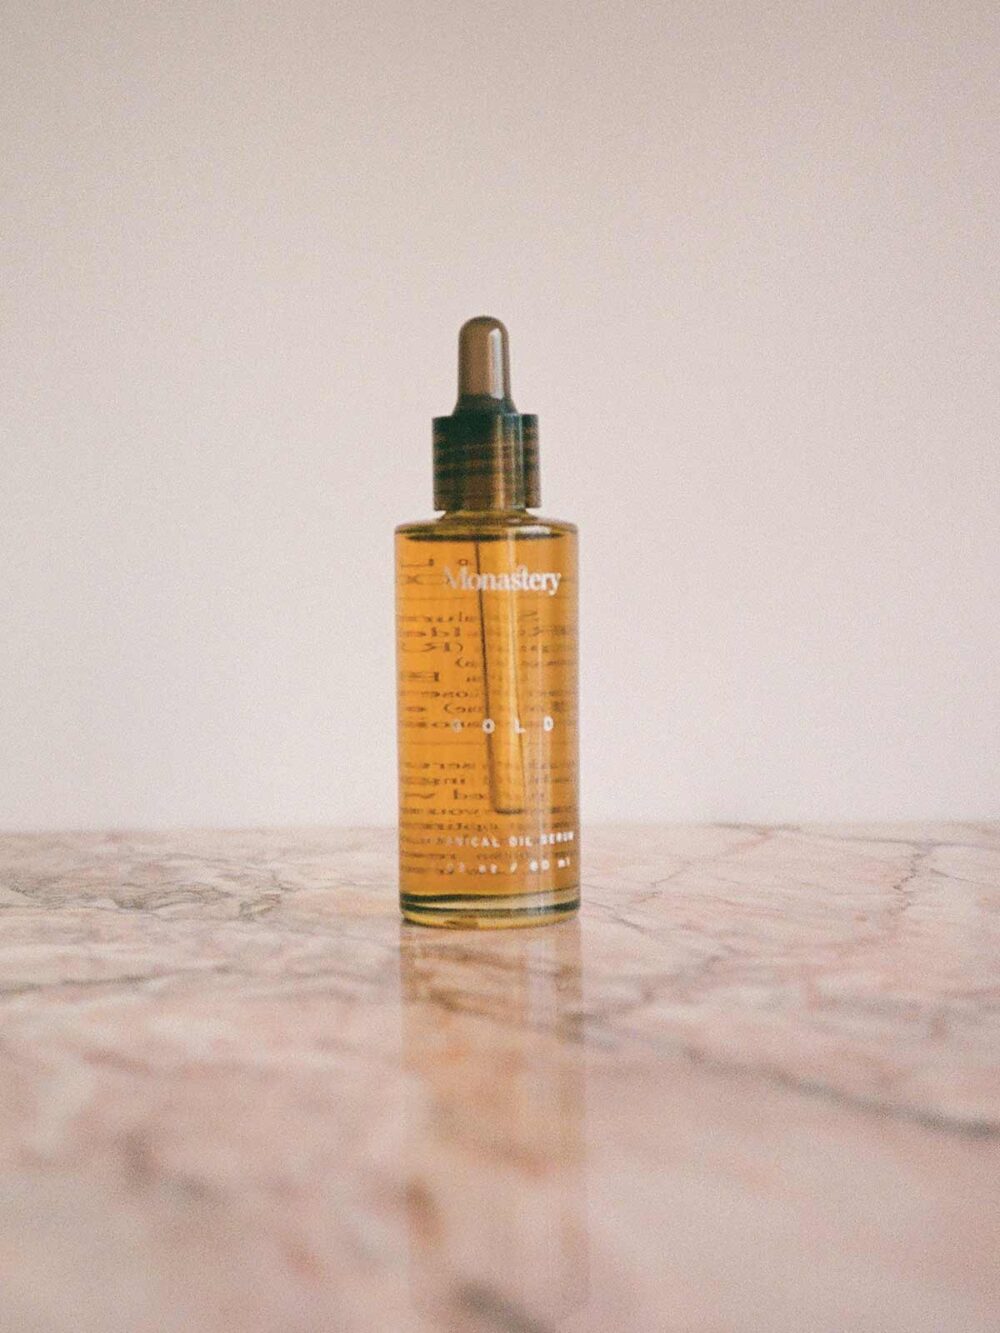 Gold Botanical Oil Serum bottle on pink marble by Monastery Made